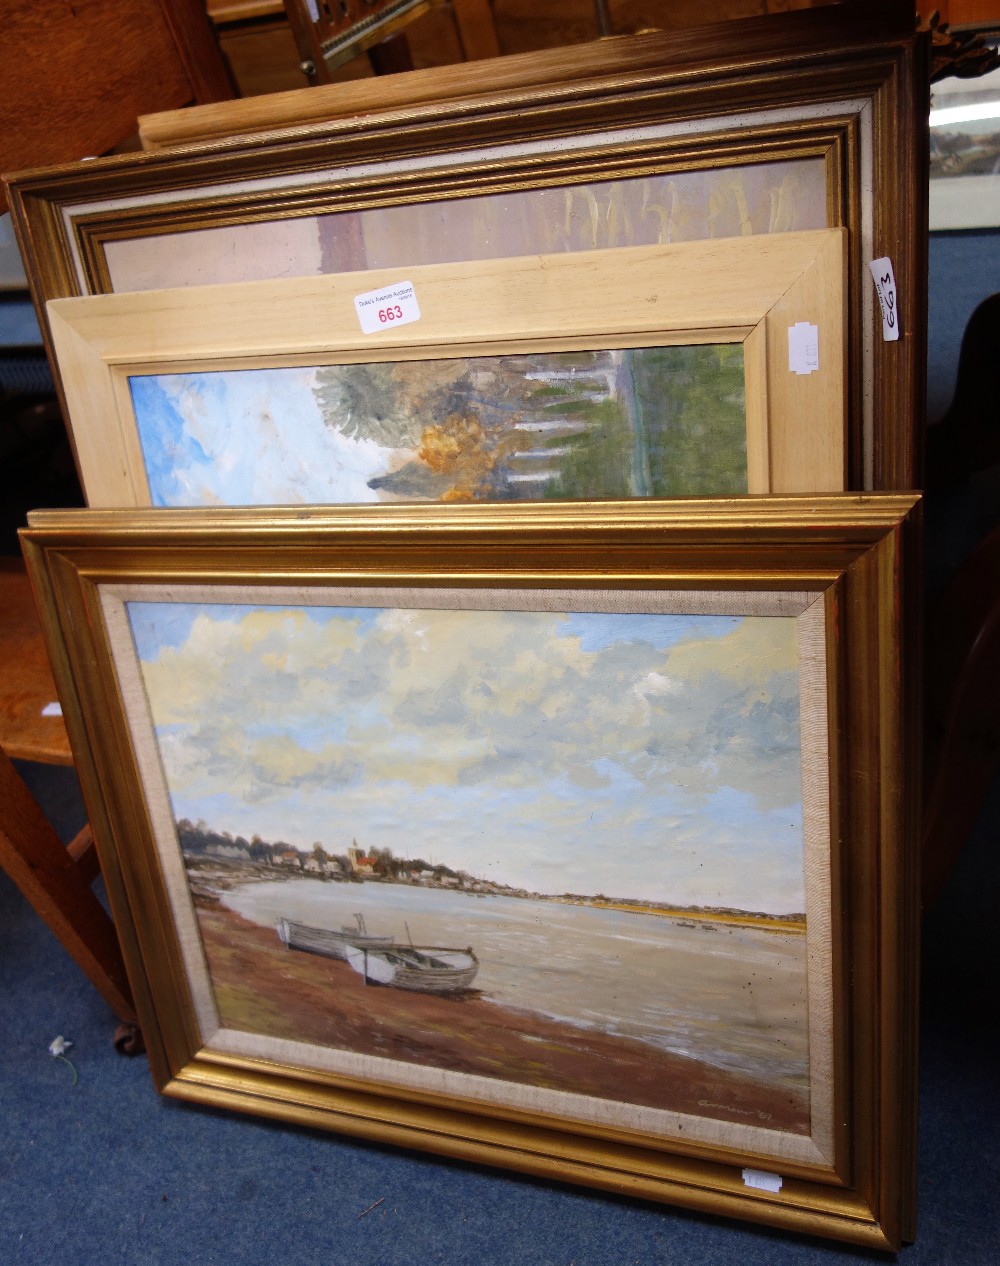 DESMOND ARMOUR; 'MALDON, THE BEACH' OIL ON BOARD, and other works by the same artist